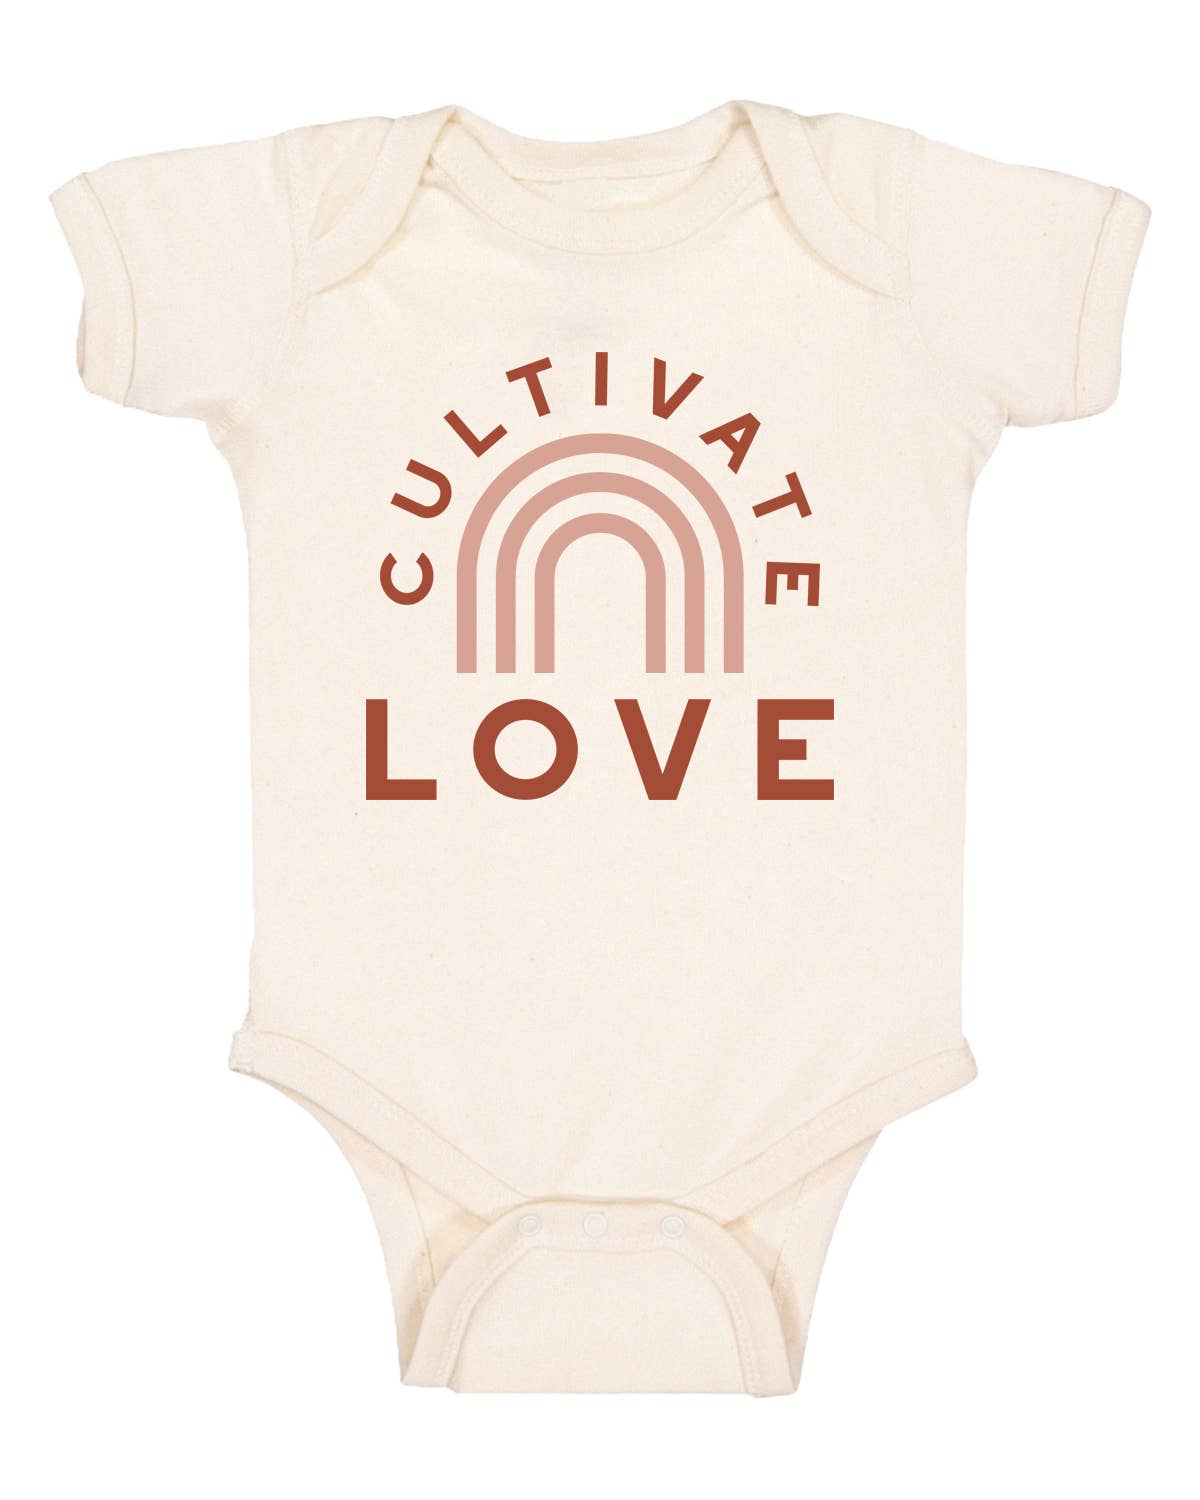 Polished Prints Baby Onesie "Cultivate Love.."